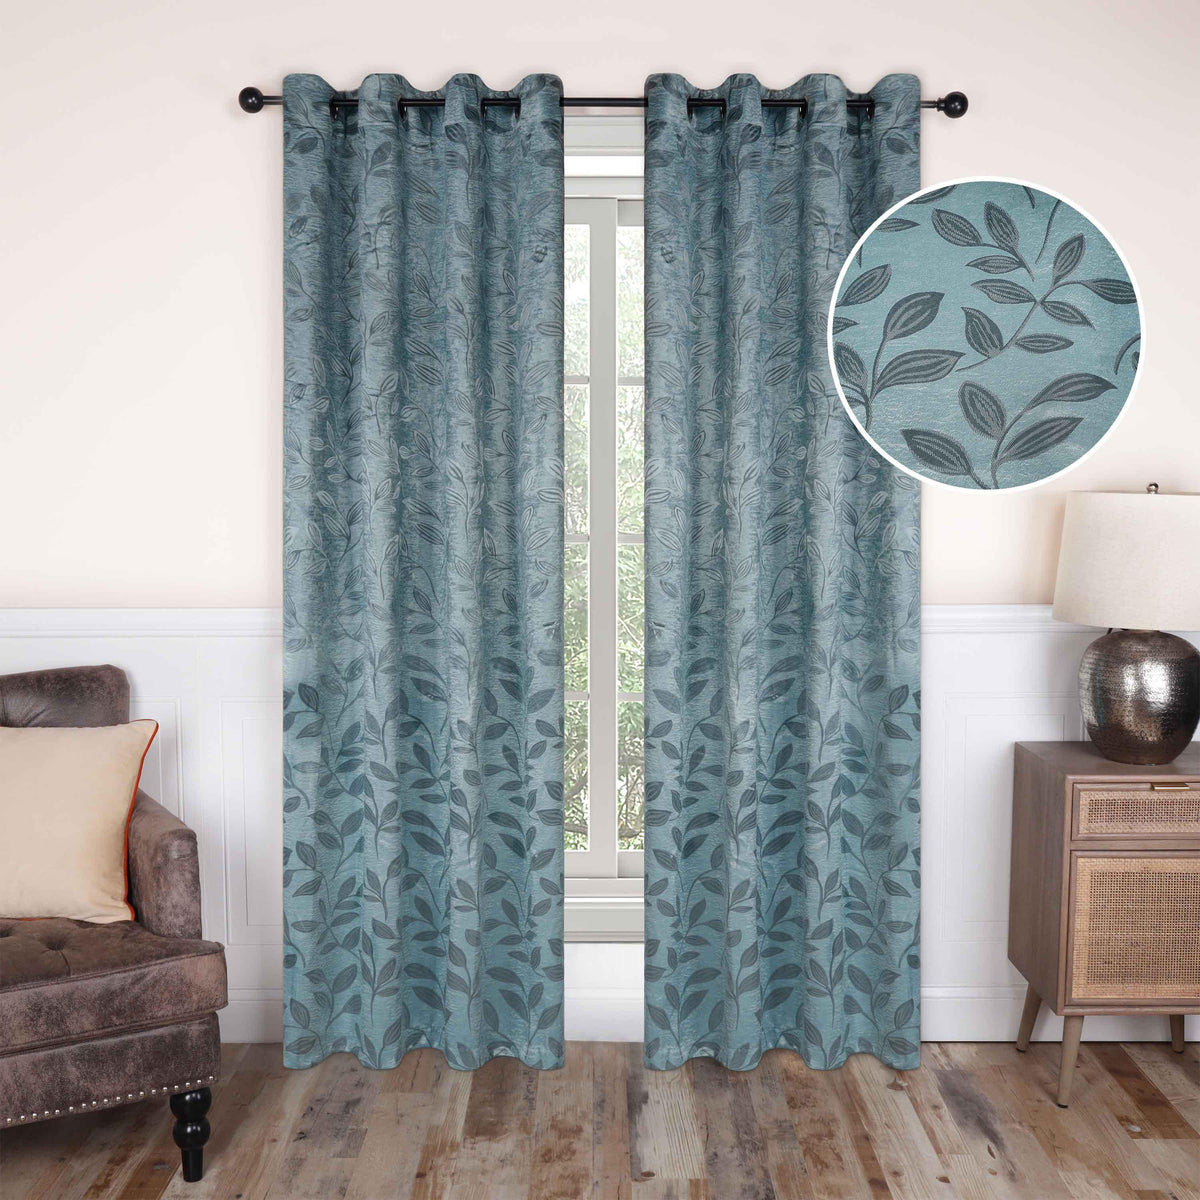 Leaves Machine Washable Room Darkening Blackout Curtains, Set of 2 - by Superior - Superior 